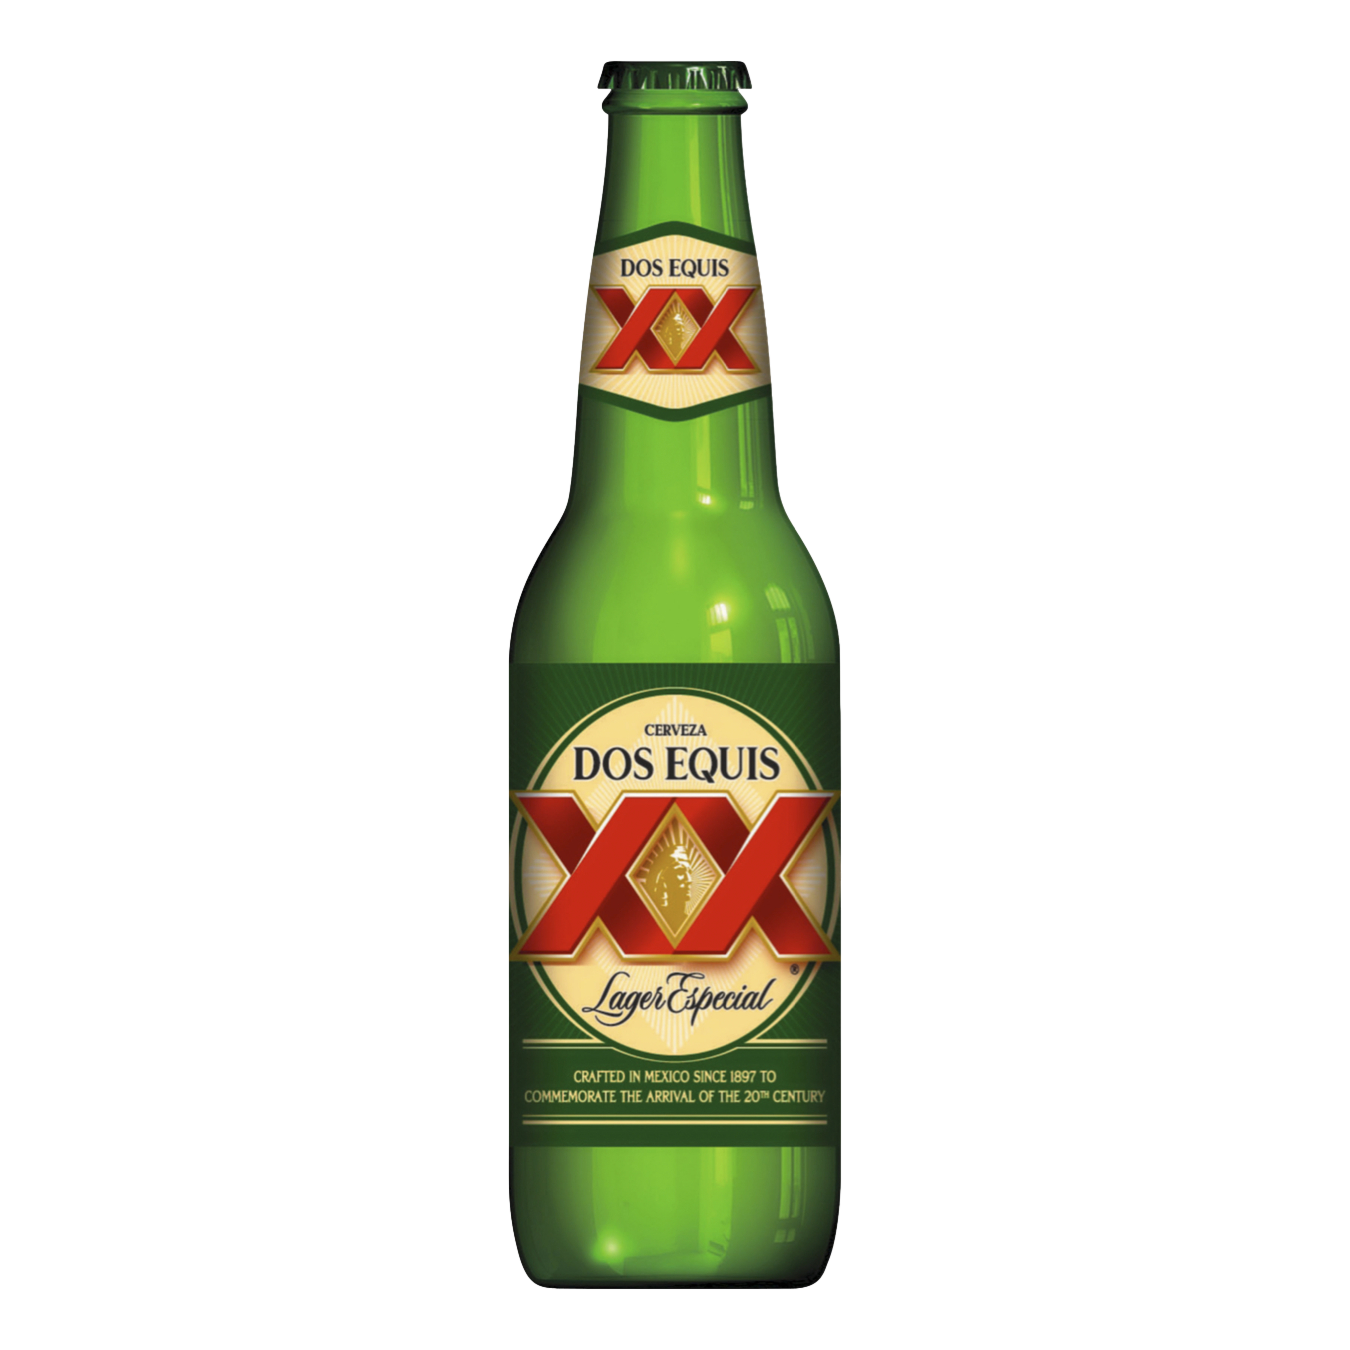 Dos Equis Lager Especial 355ml Bottle Single